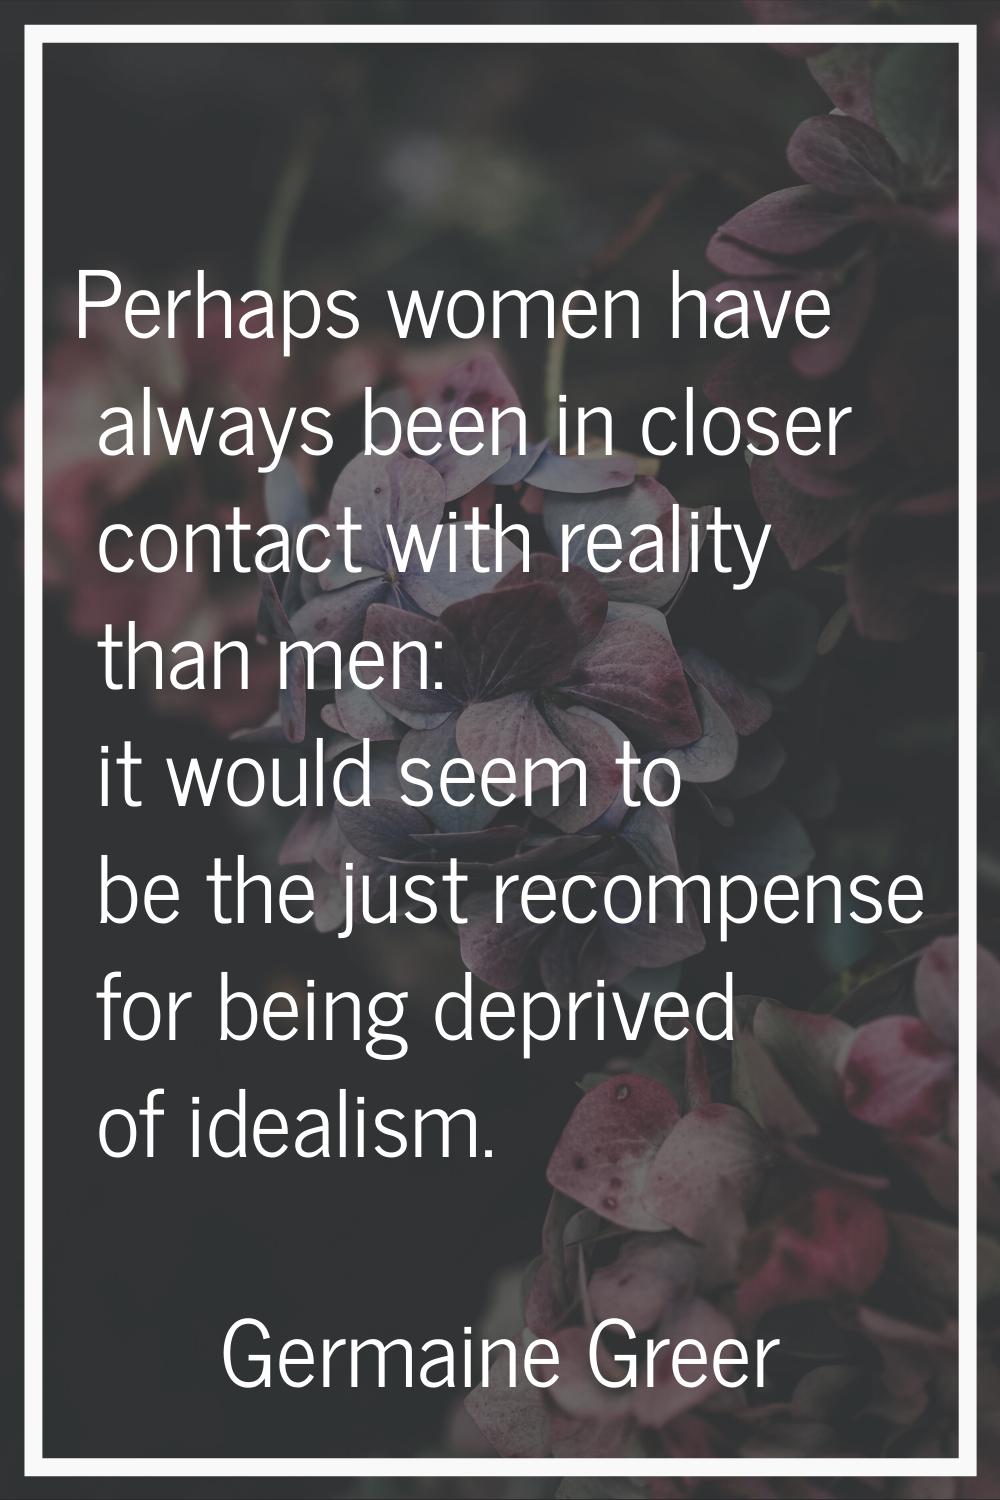 Perhaps women have always been in closer contact with reality than men: it would seem to be the jus